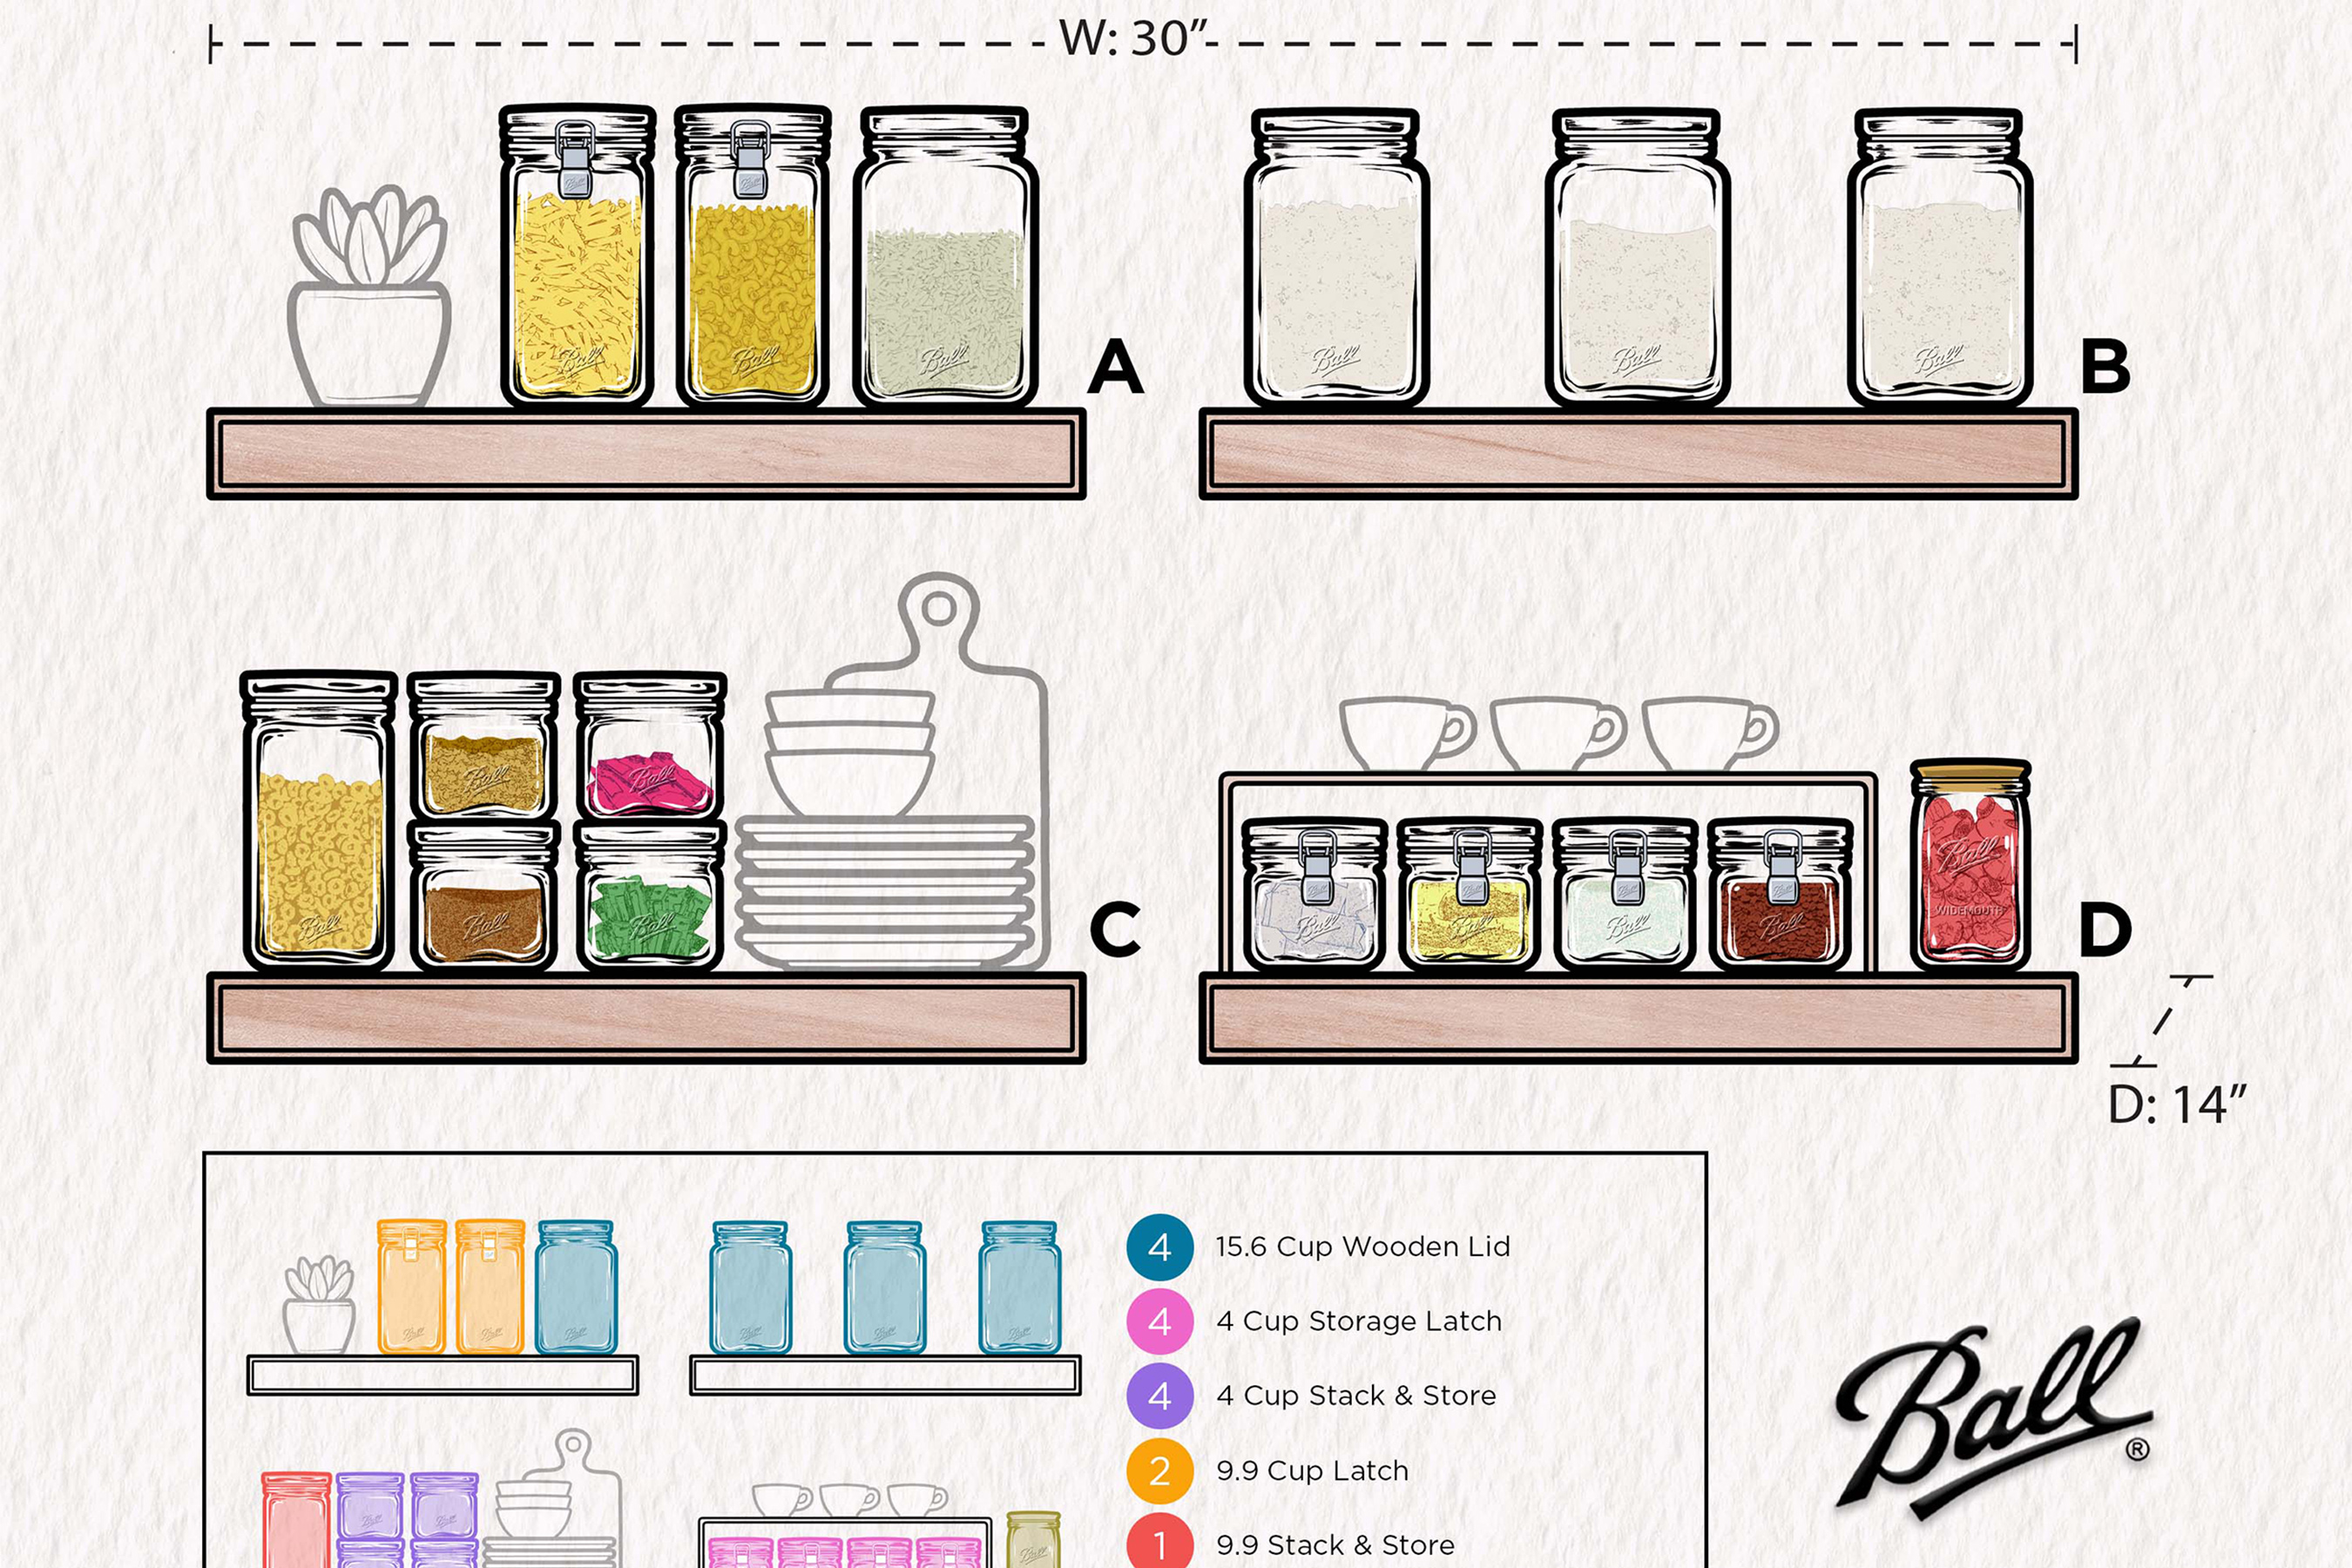 The makers of Ball® home canning are taking the guesswork out of pantry organization with blueprint for setting up an open shelf pantry. Layout courtesy of Kim Bui (@xomyhome).